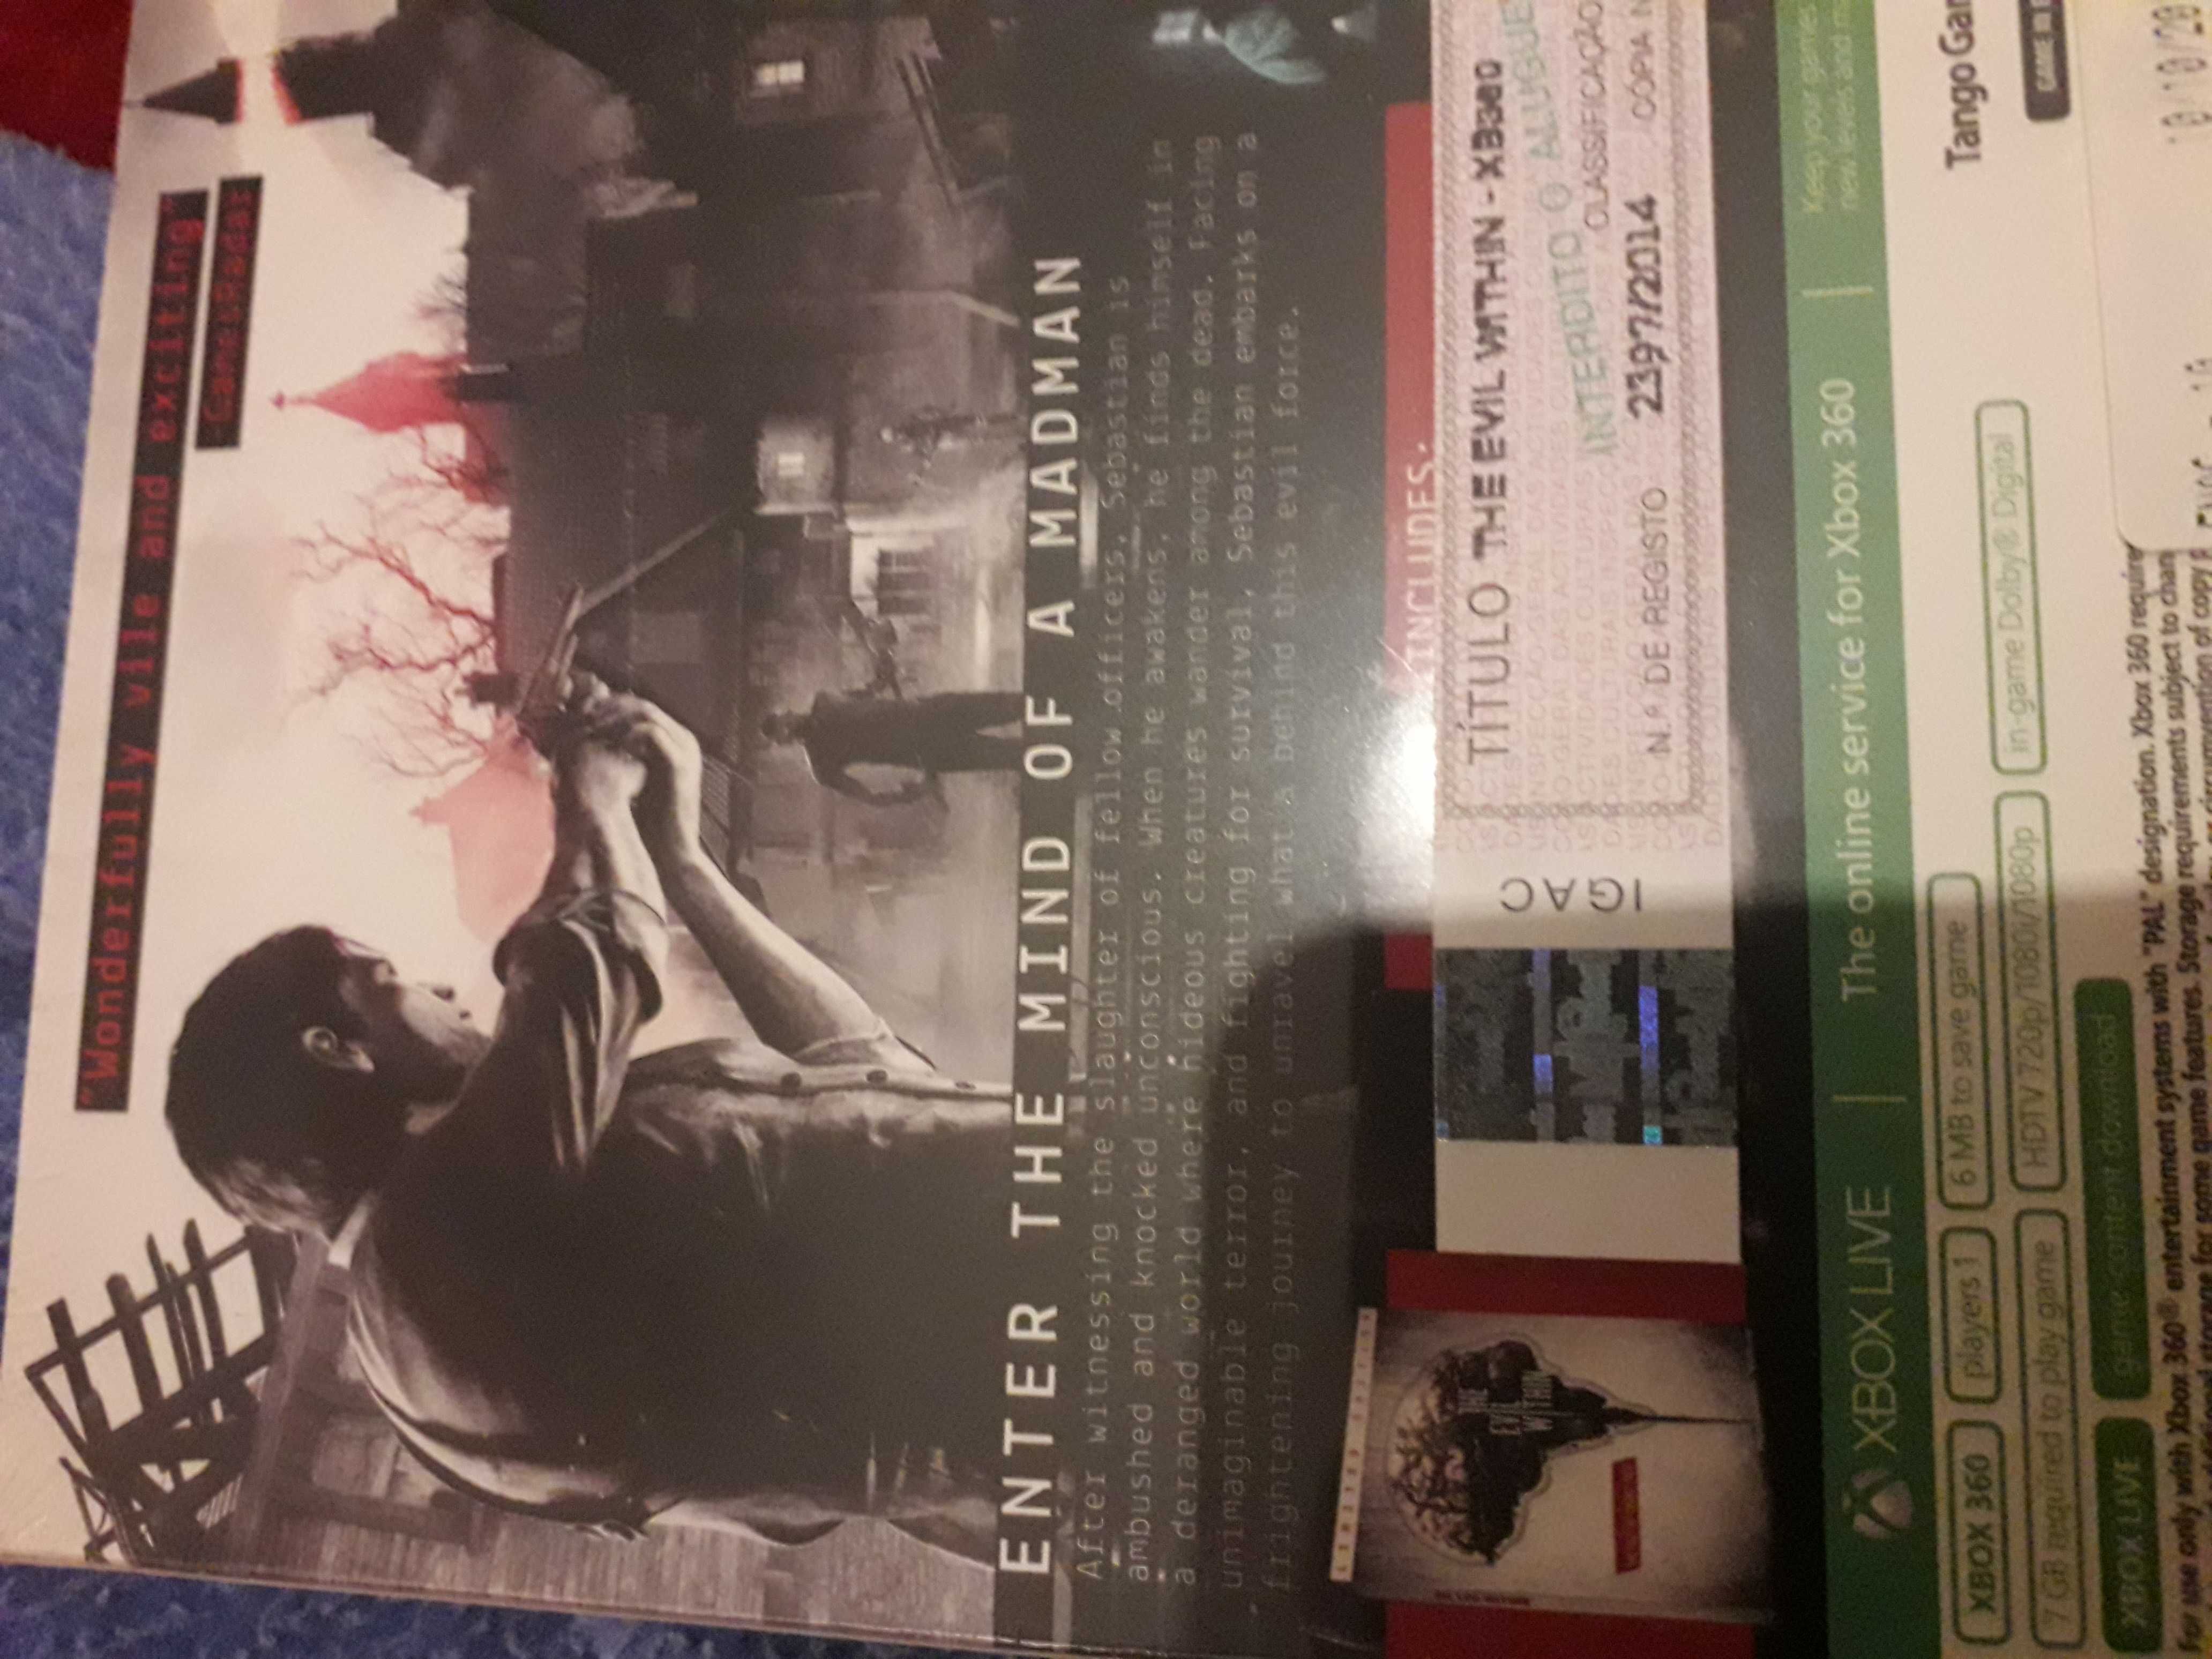 Xbox 360 The Evil Within limited edition